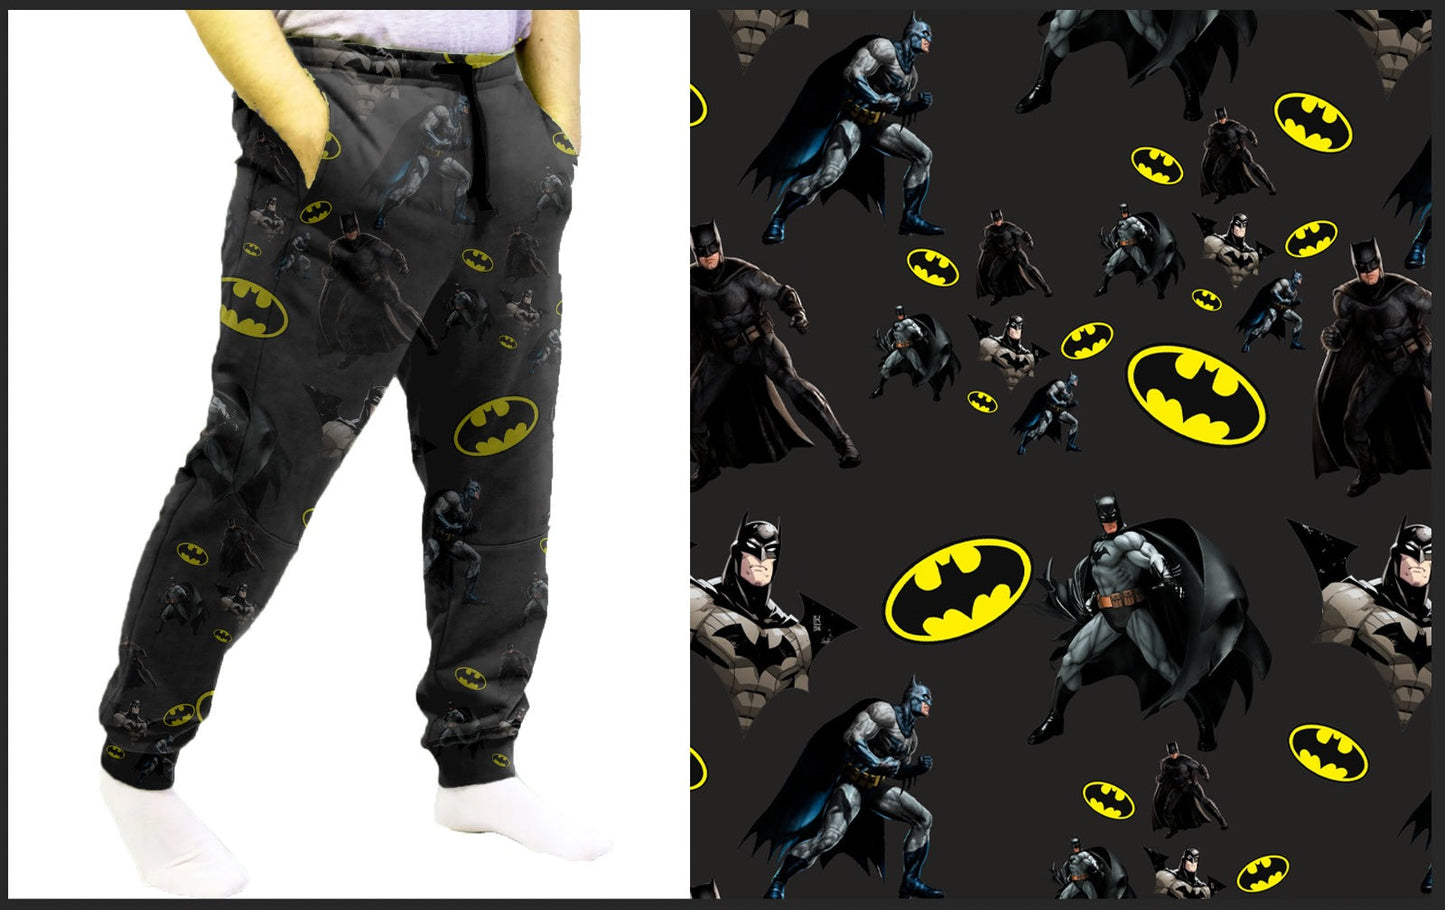 The Bat leggings, joggers and loungers kids & adults